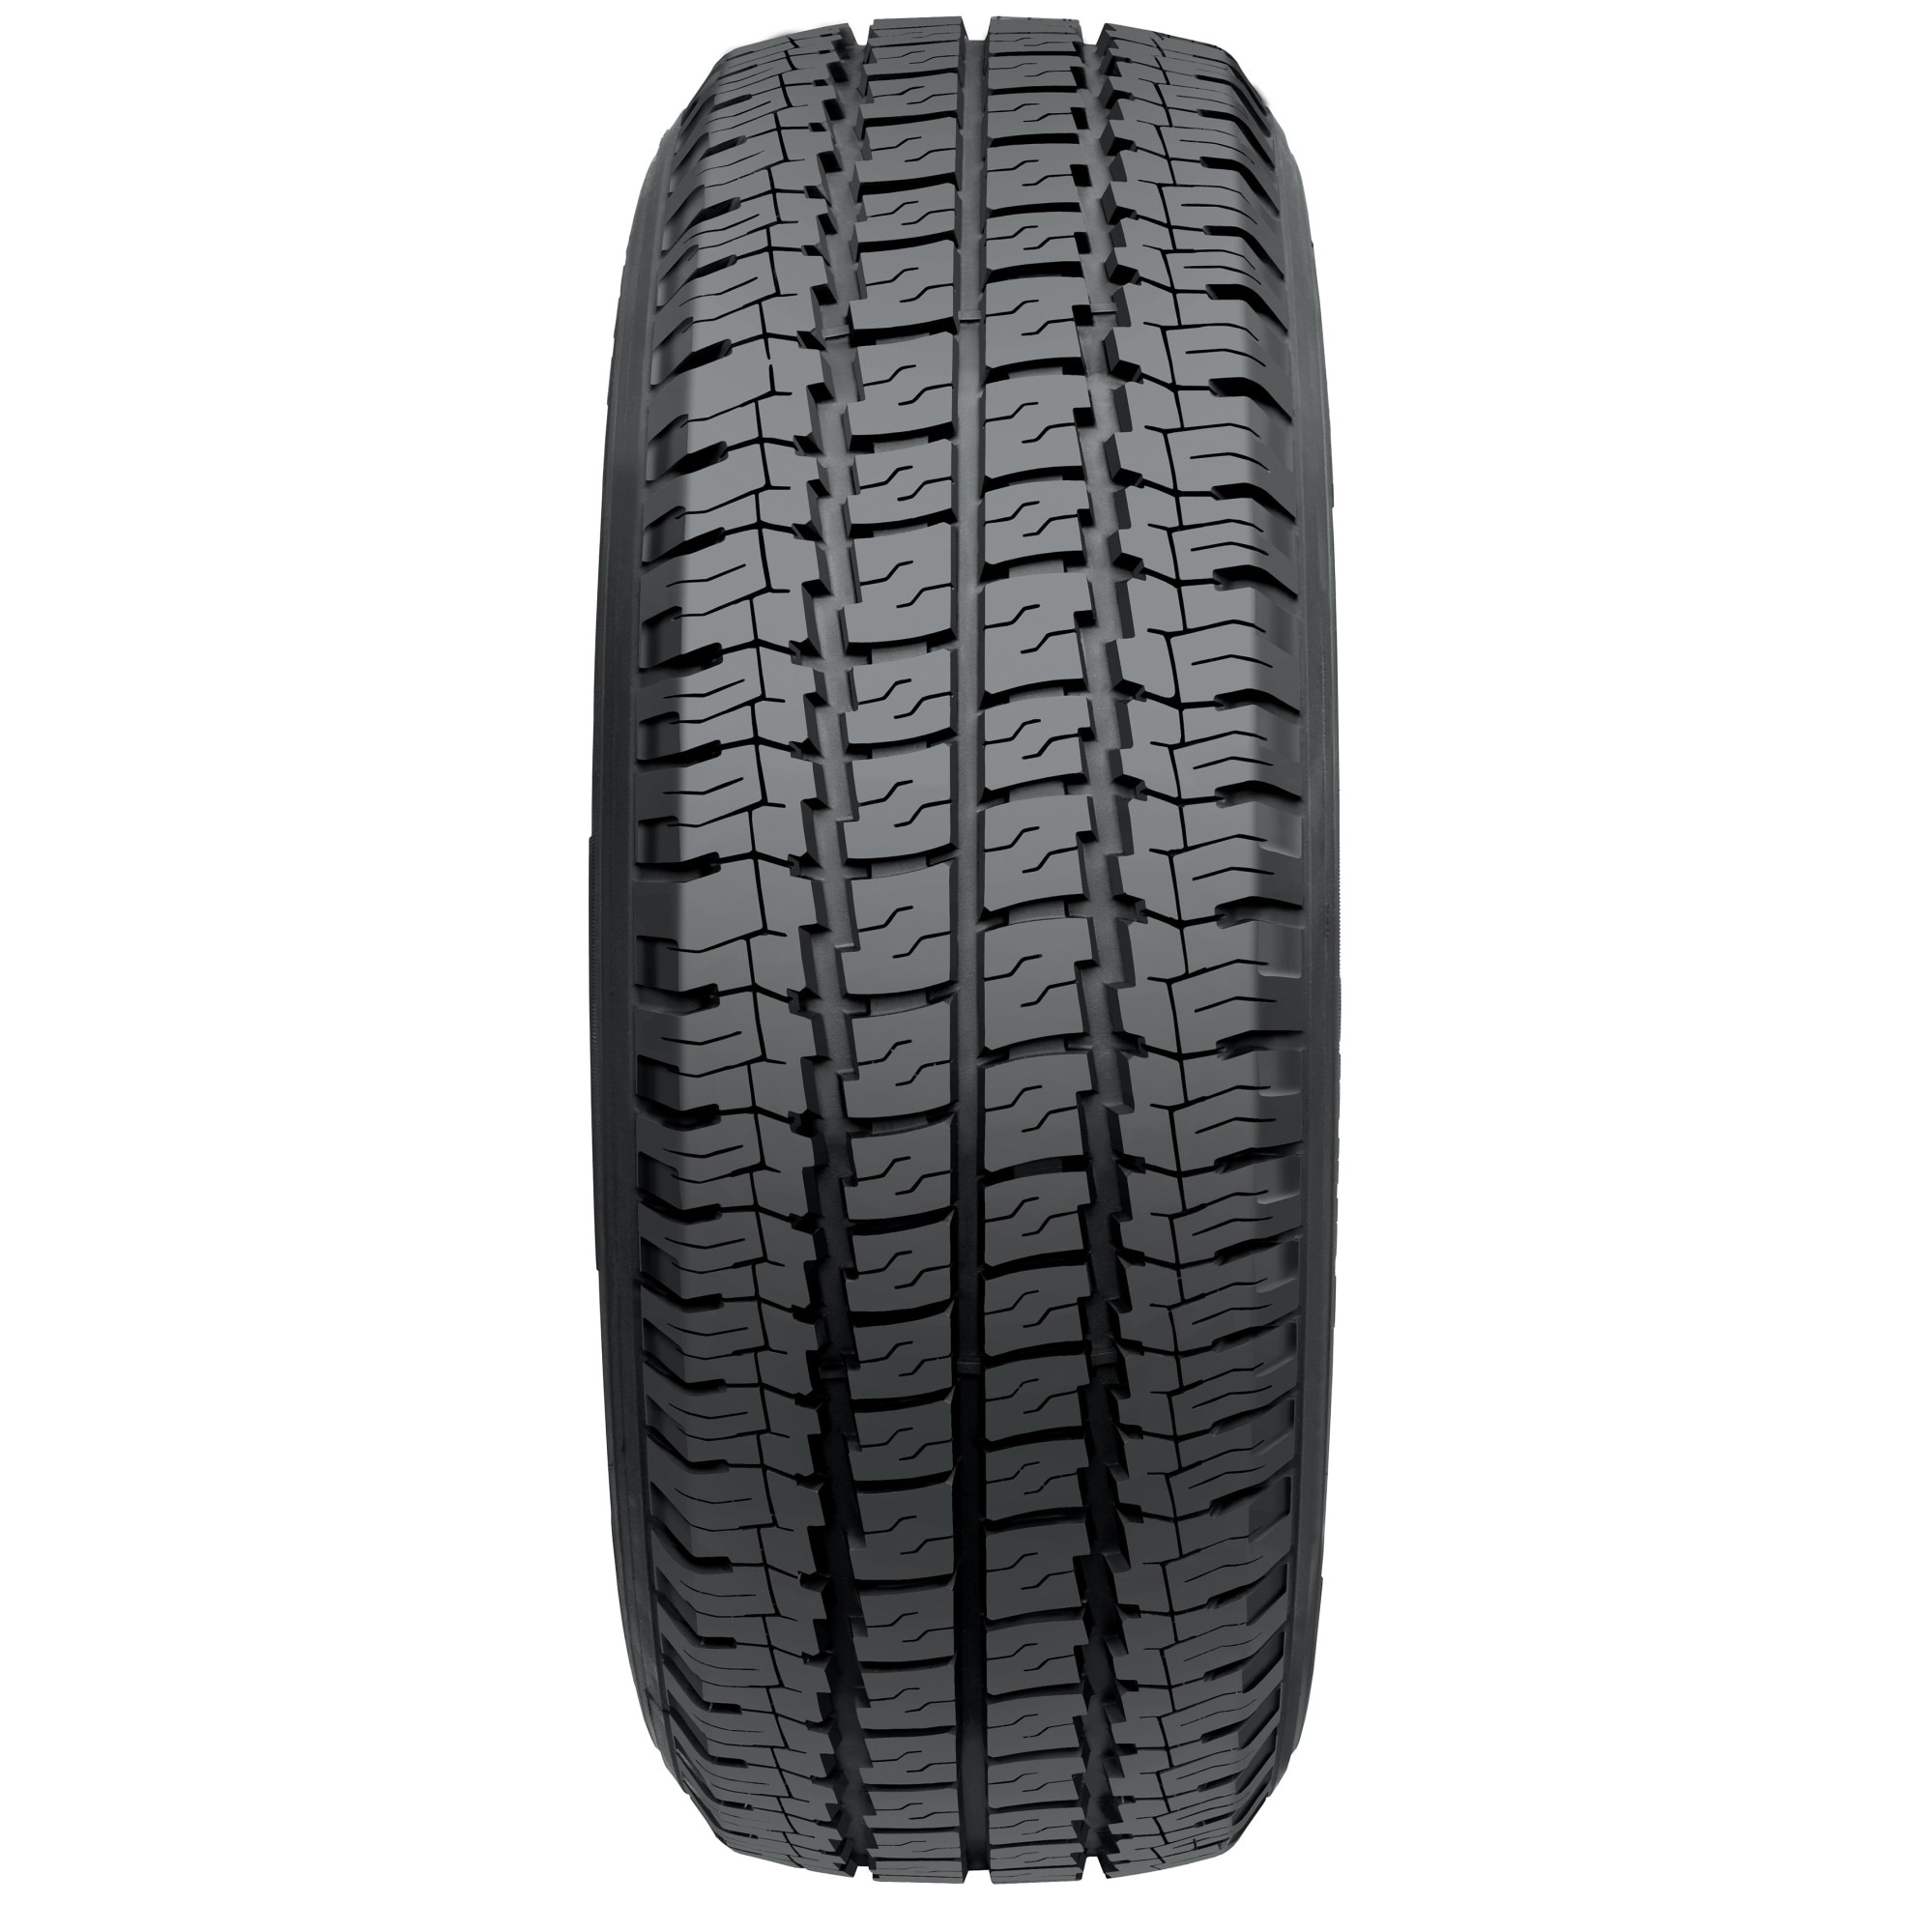 Tyres Imperial Van driver as 205 70 R15C 106/104S TL All season for light truck 